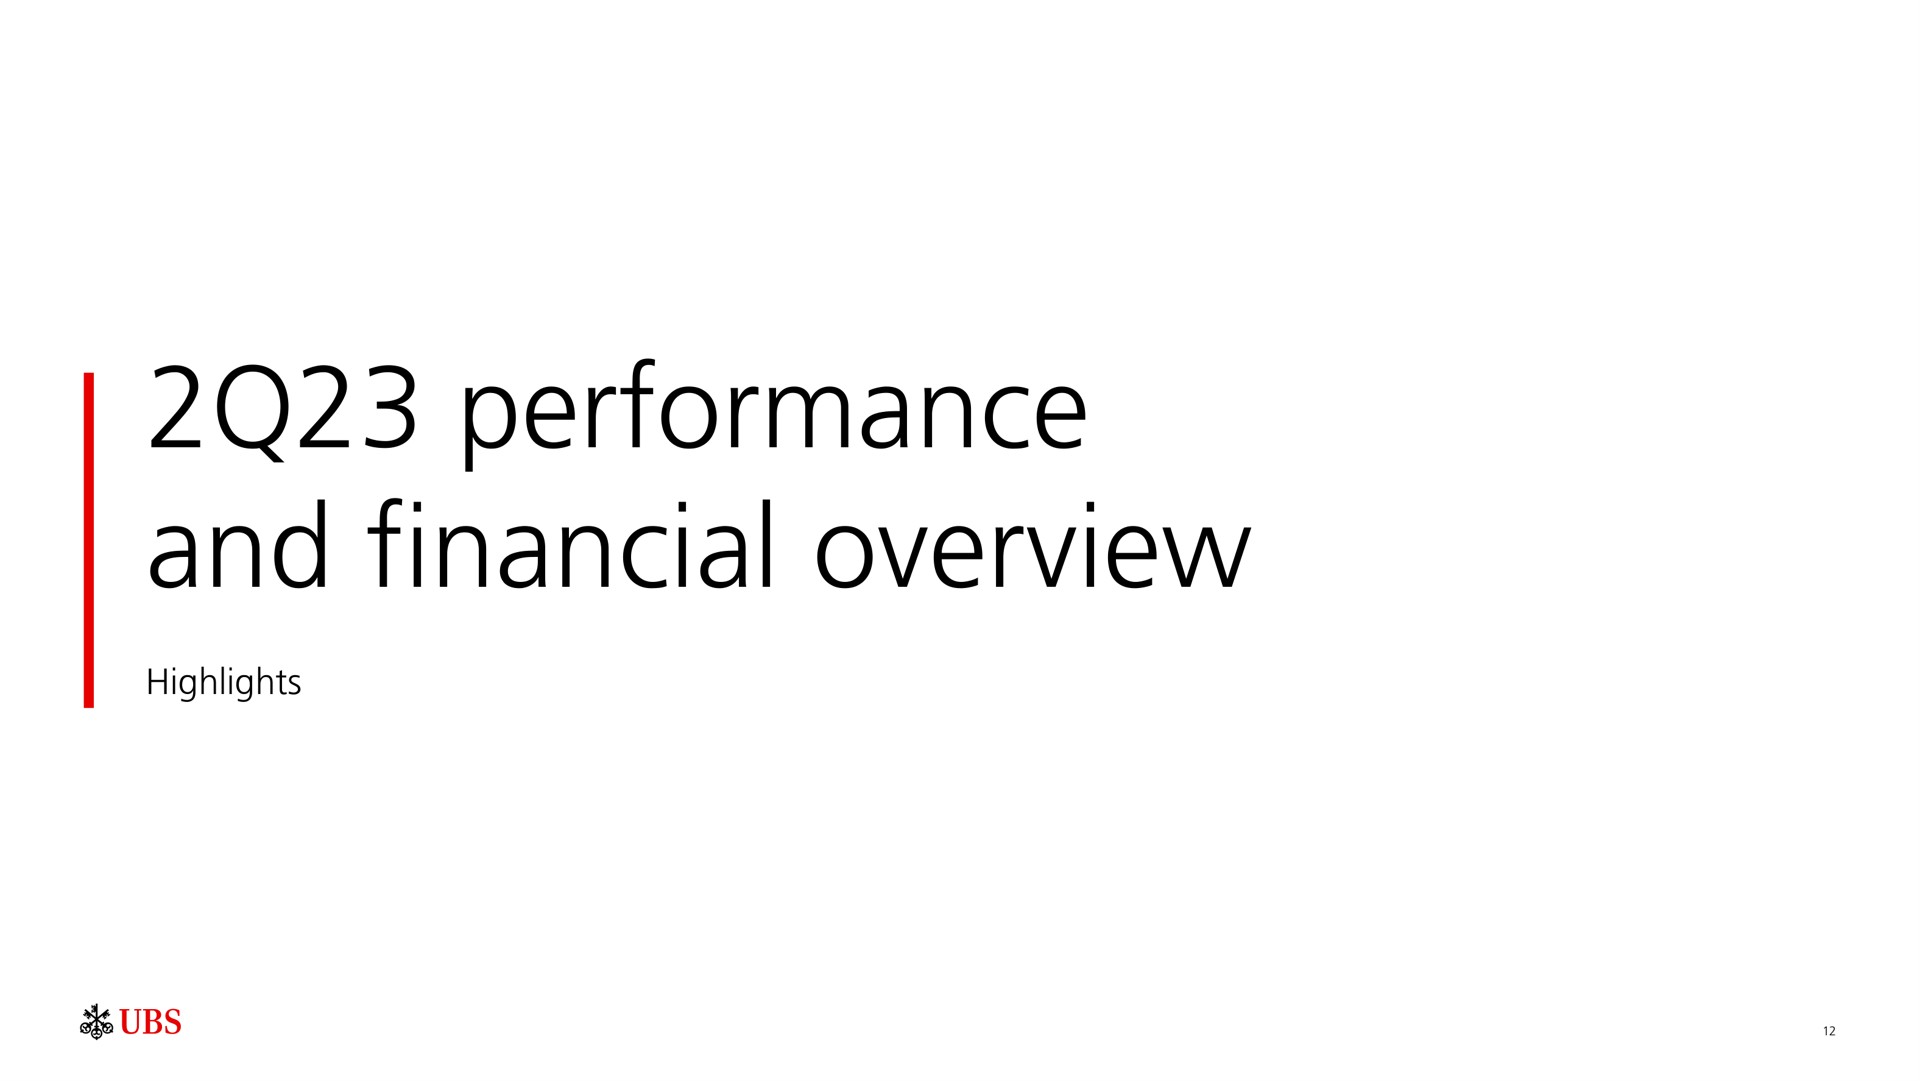 performance and financial overview | UBS